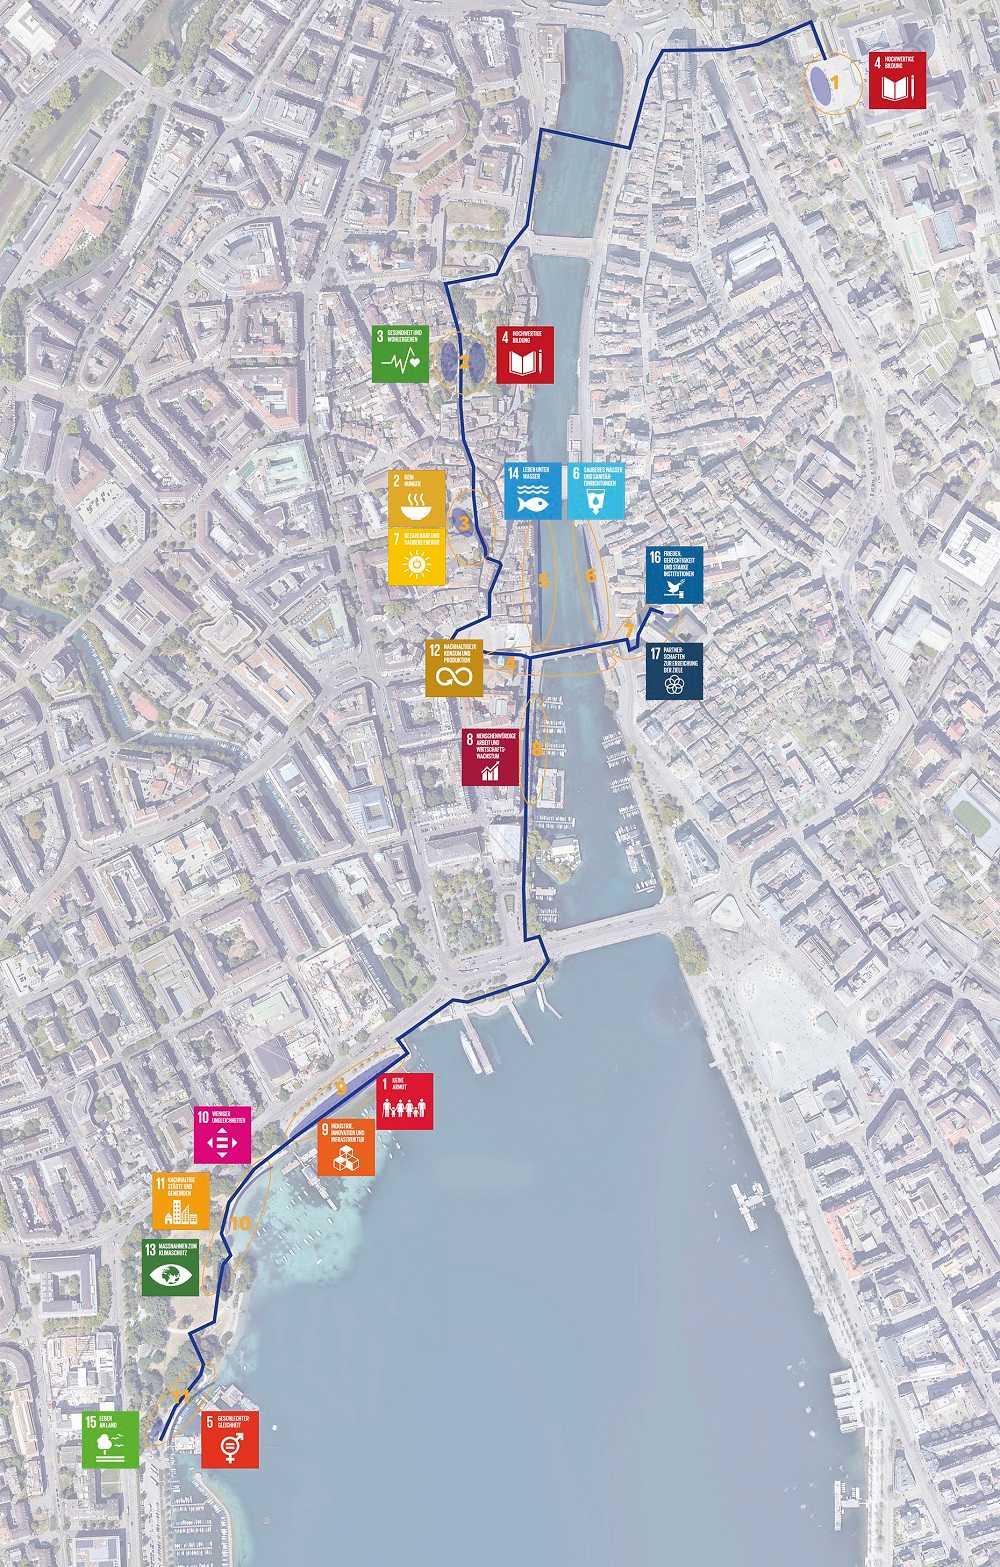 Overview of exhibition locations in the city of Zurich